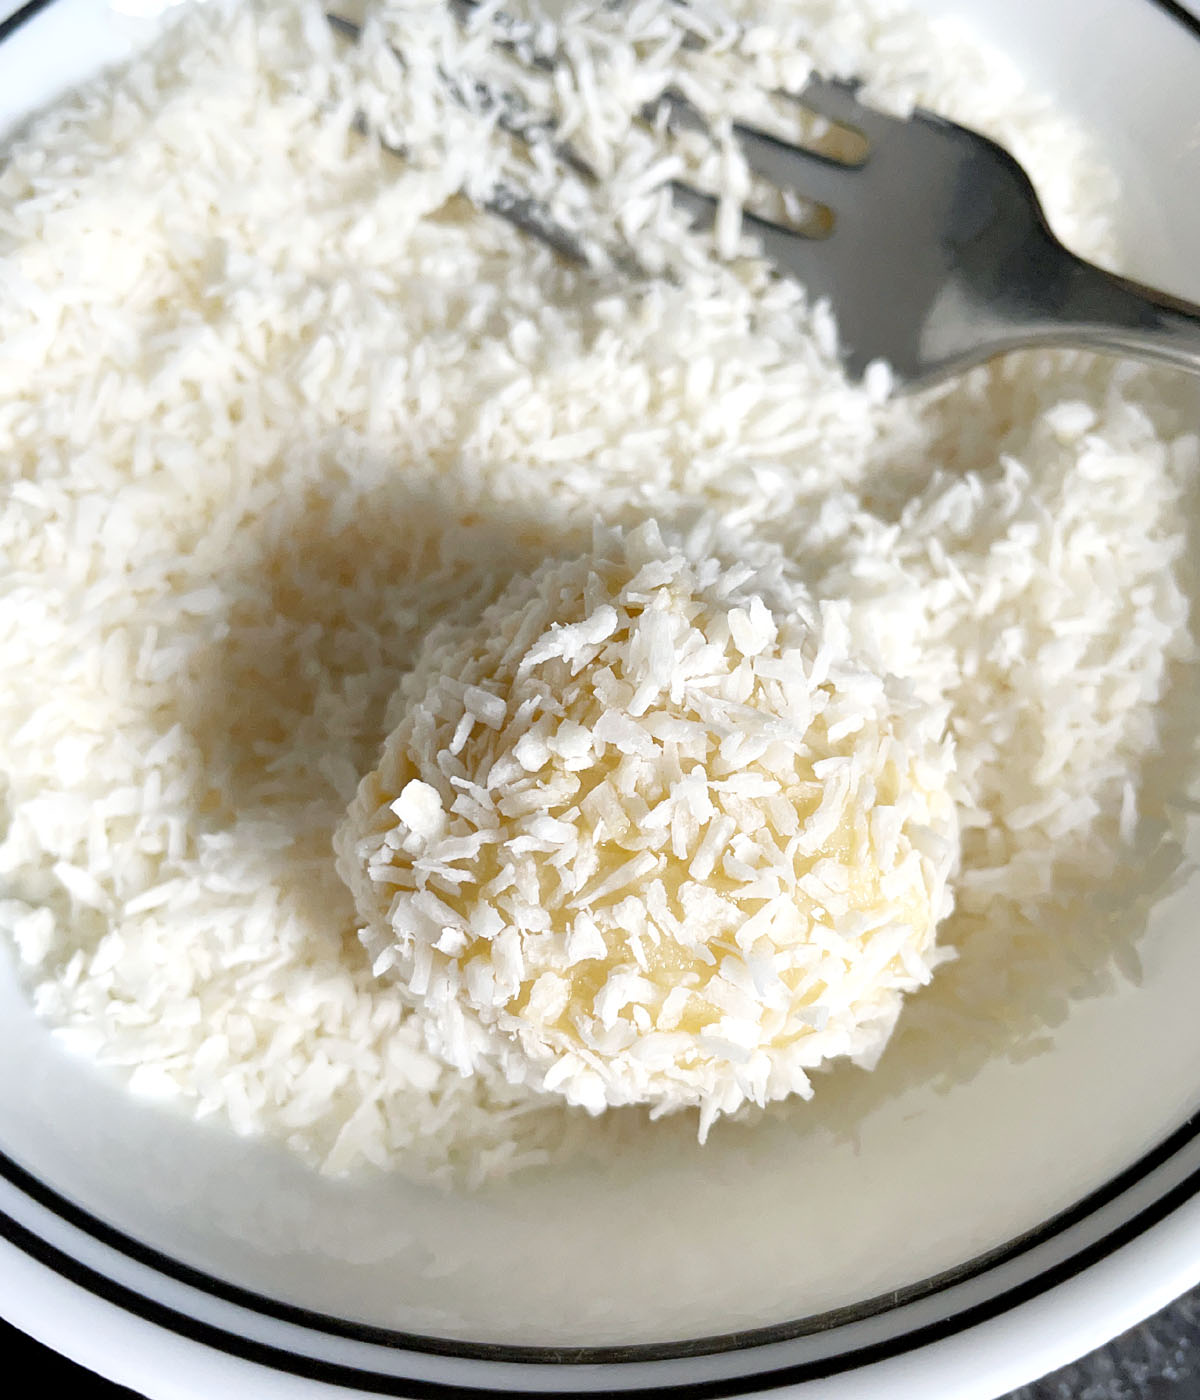 A ball of dough coated in a white coconut flakes.